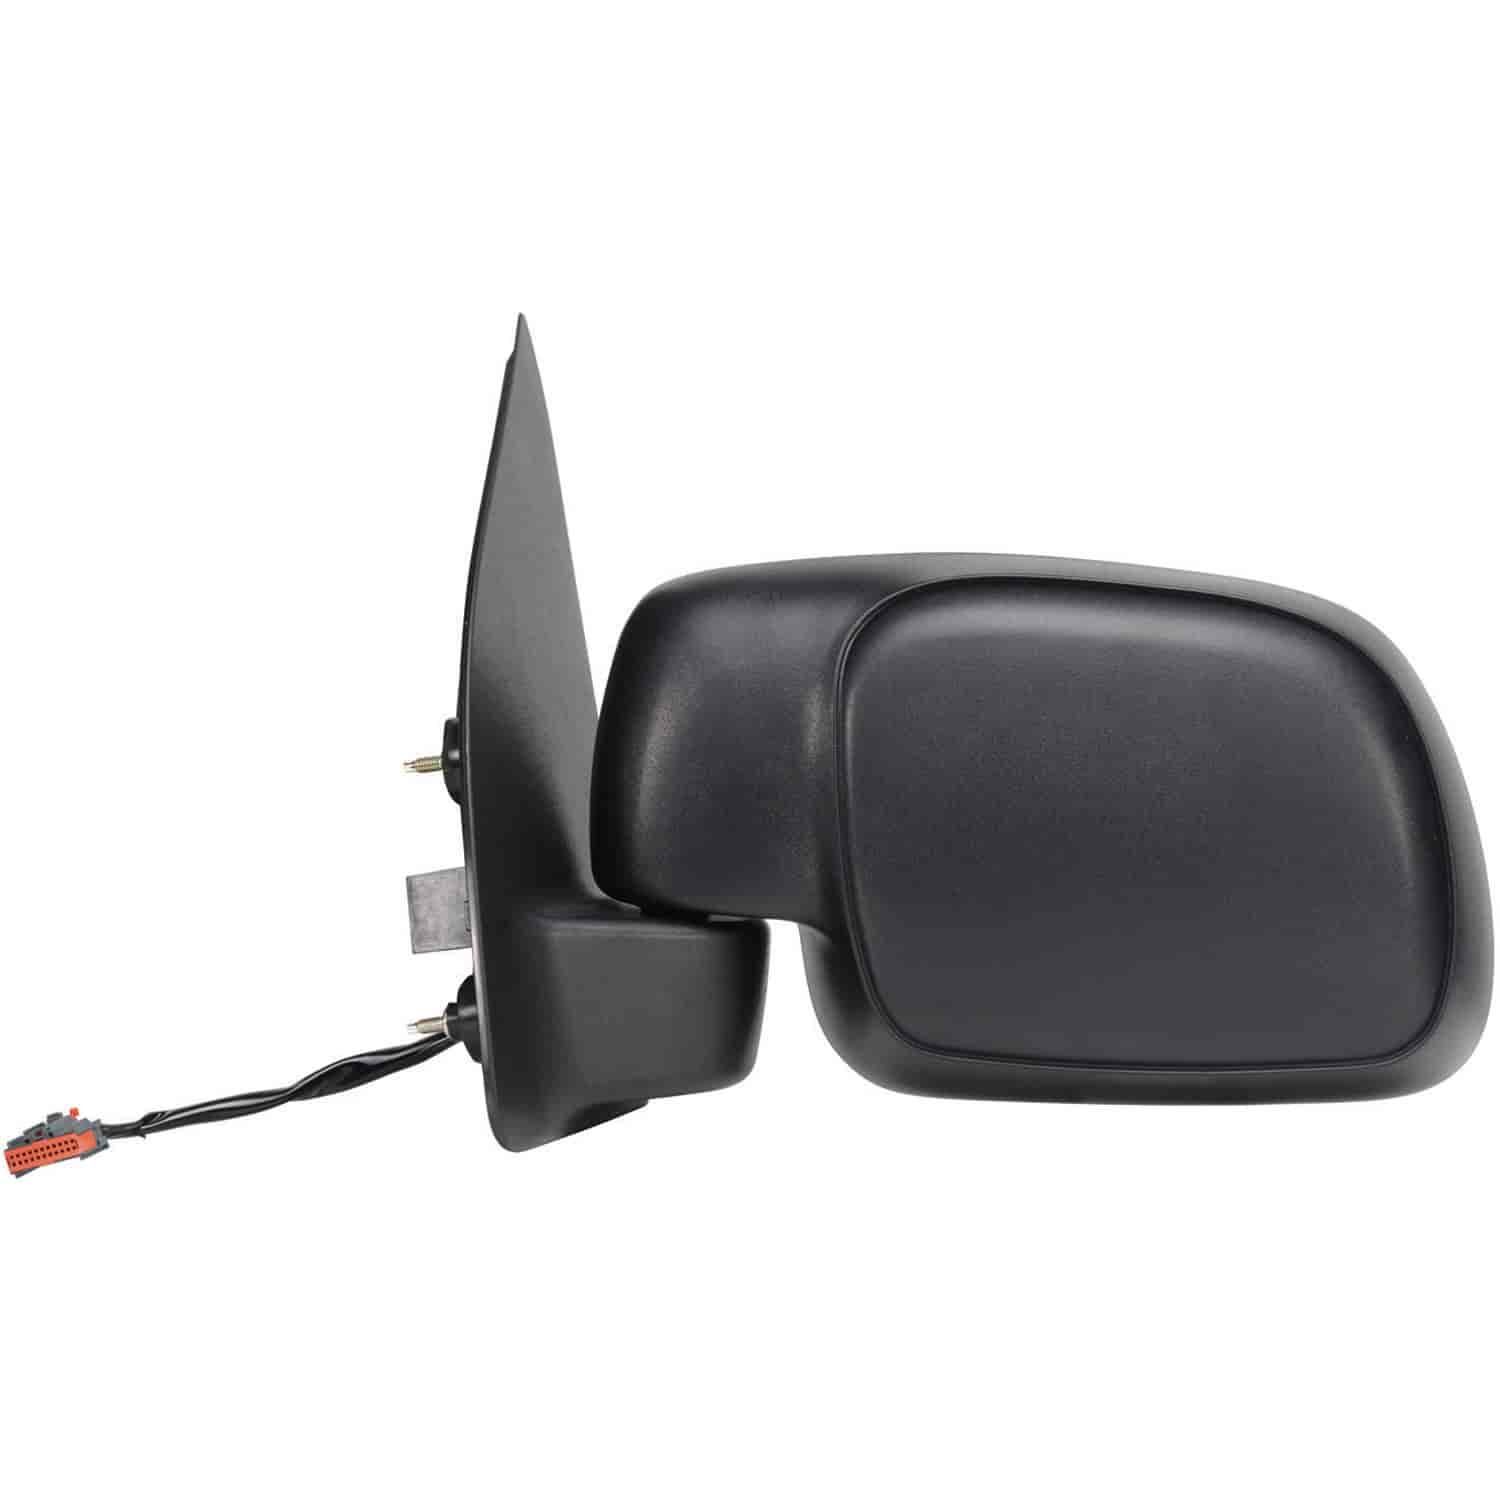 OEM Style Replacement mirror for 01-05 Ford Excursion driver side mirror tested to fit and function